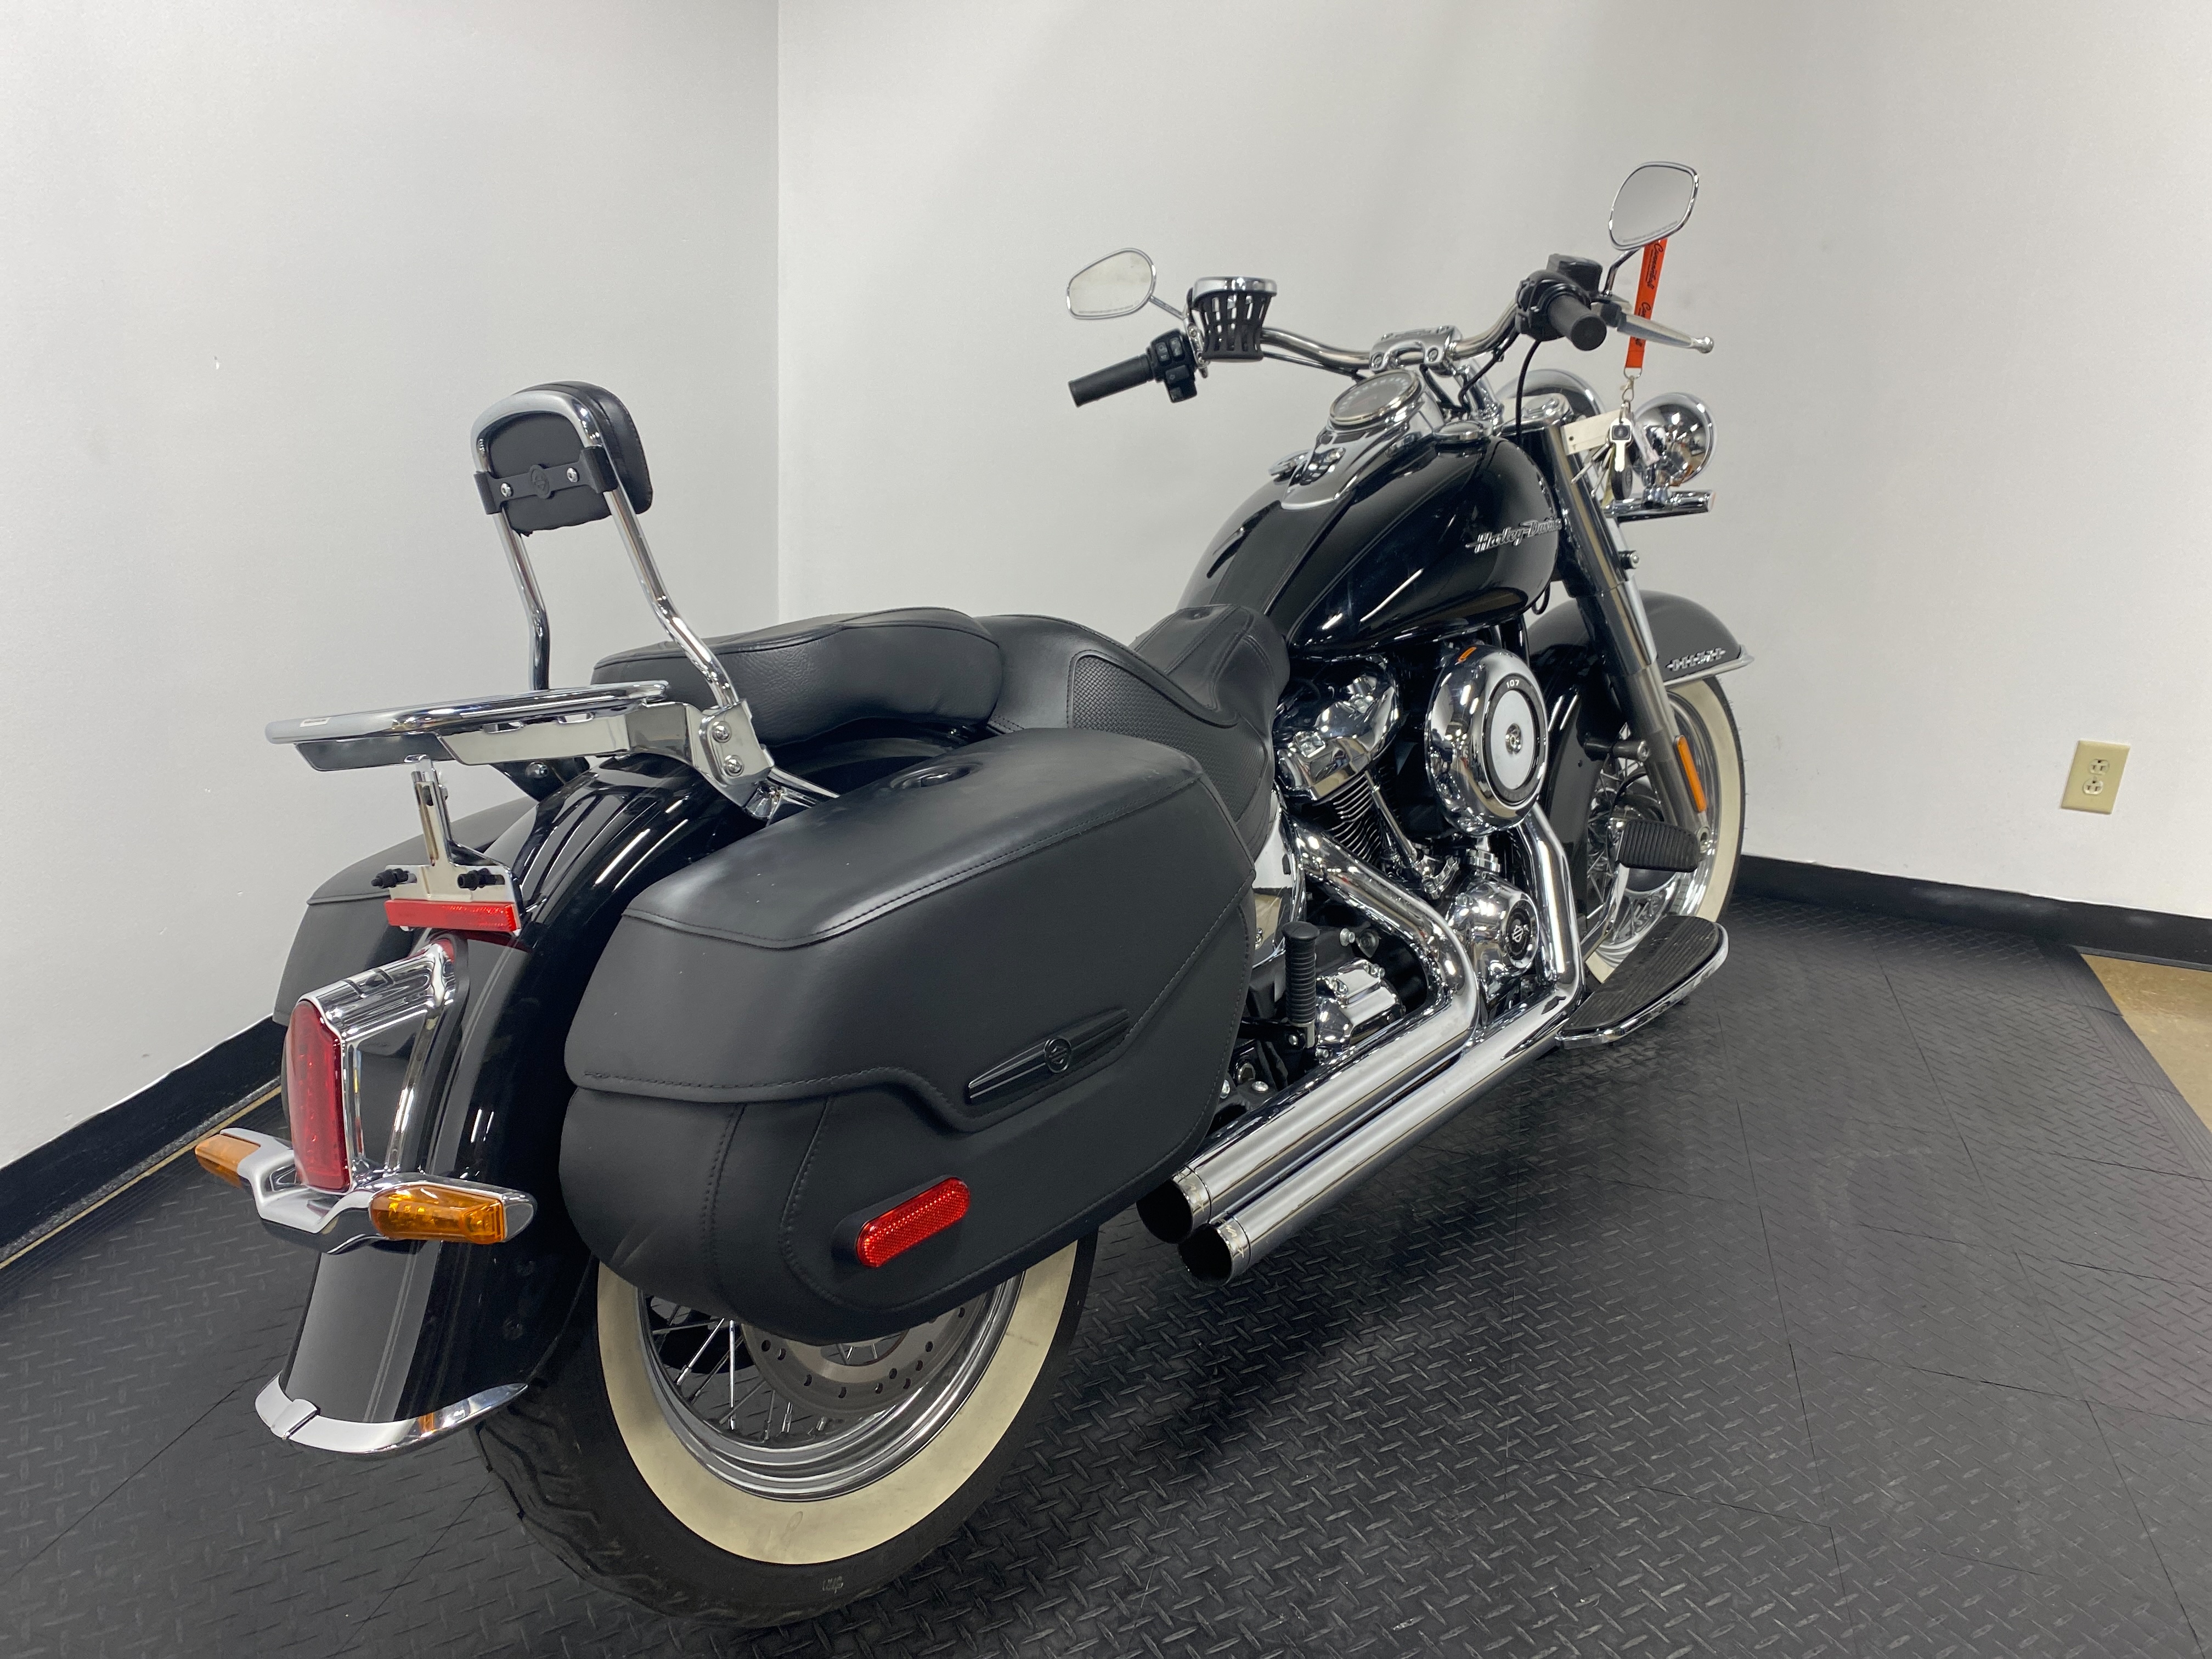 2019 Harley-Davidson Softail Deluxe at Cannonball Harley-Davidson